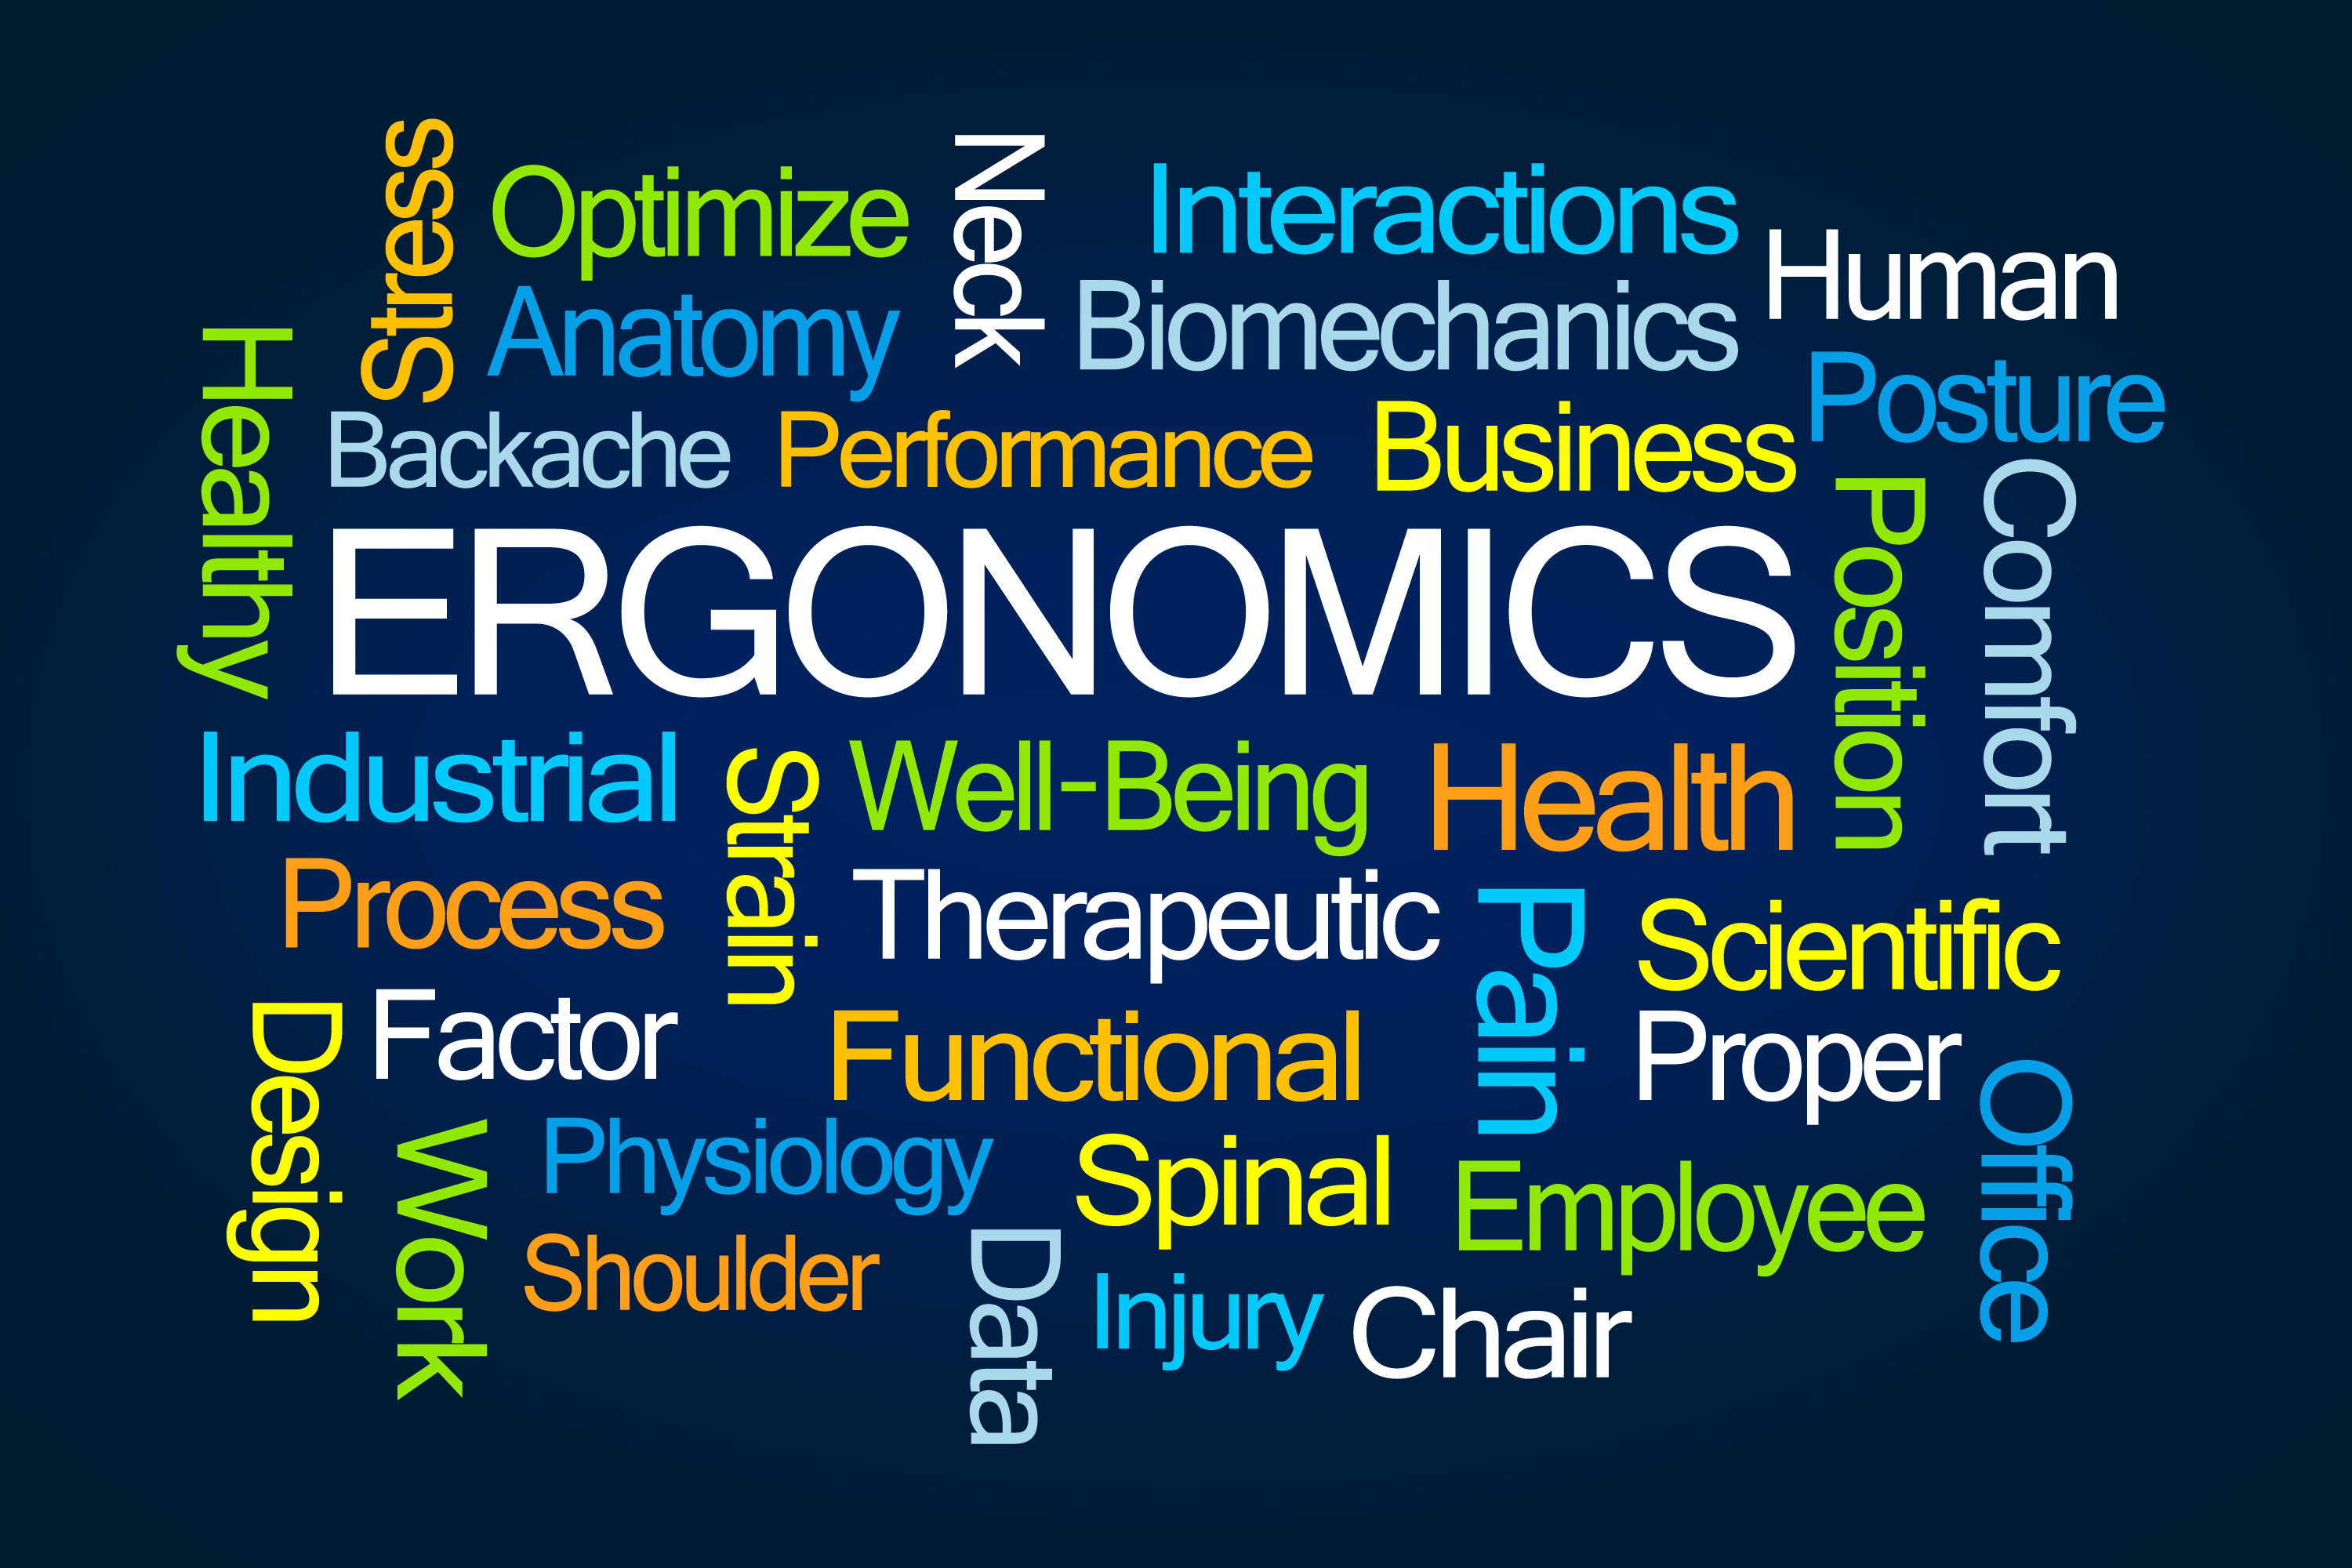 Using ergonomics to eliminate incidents and accidents